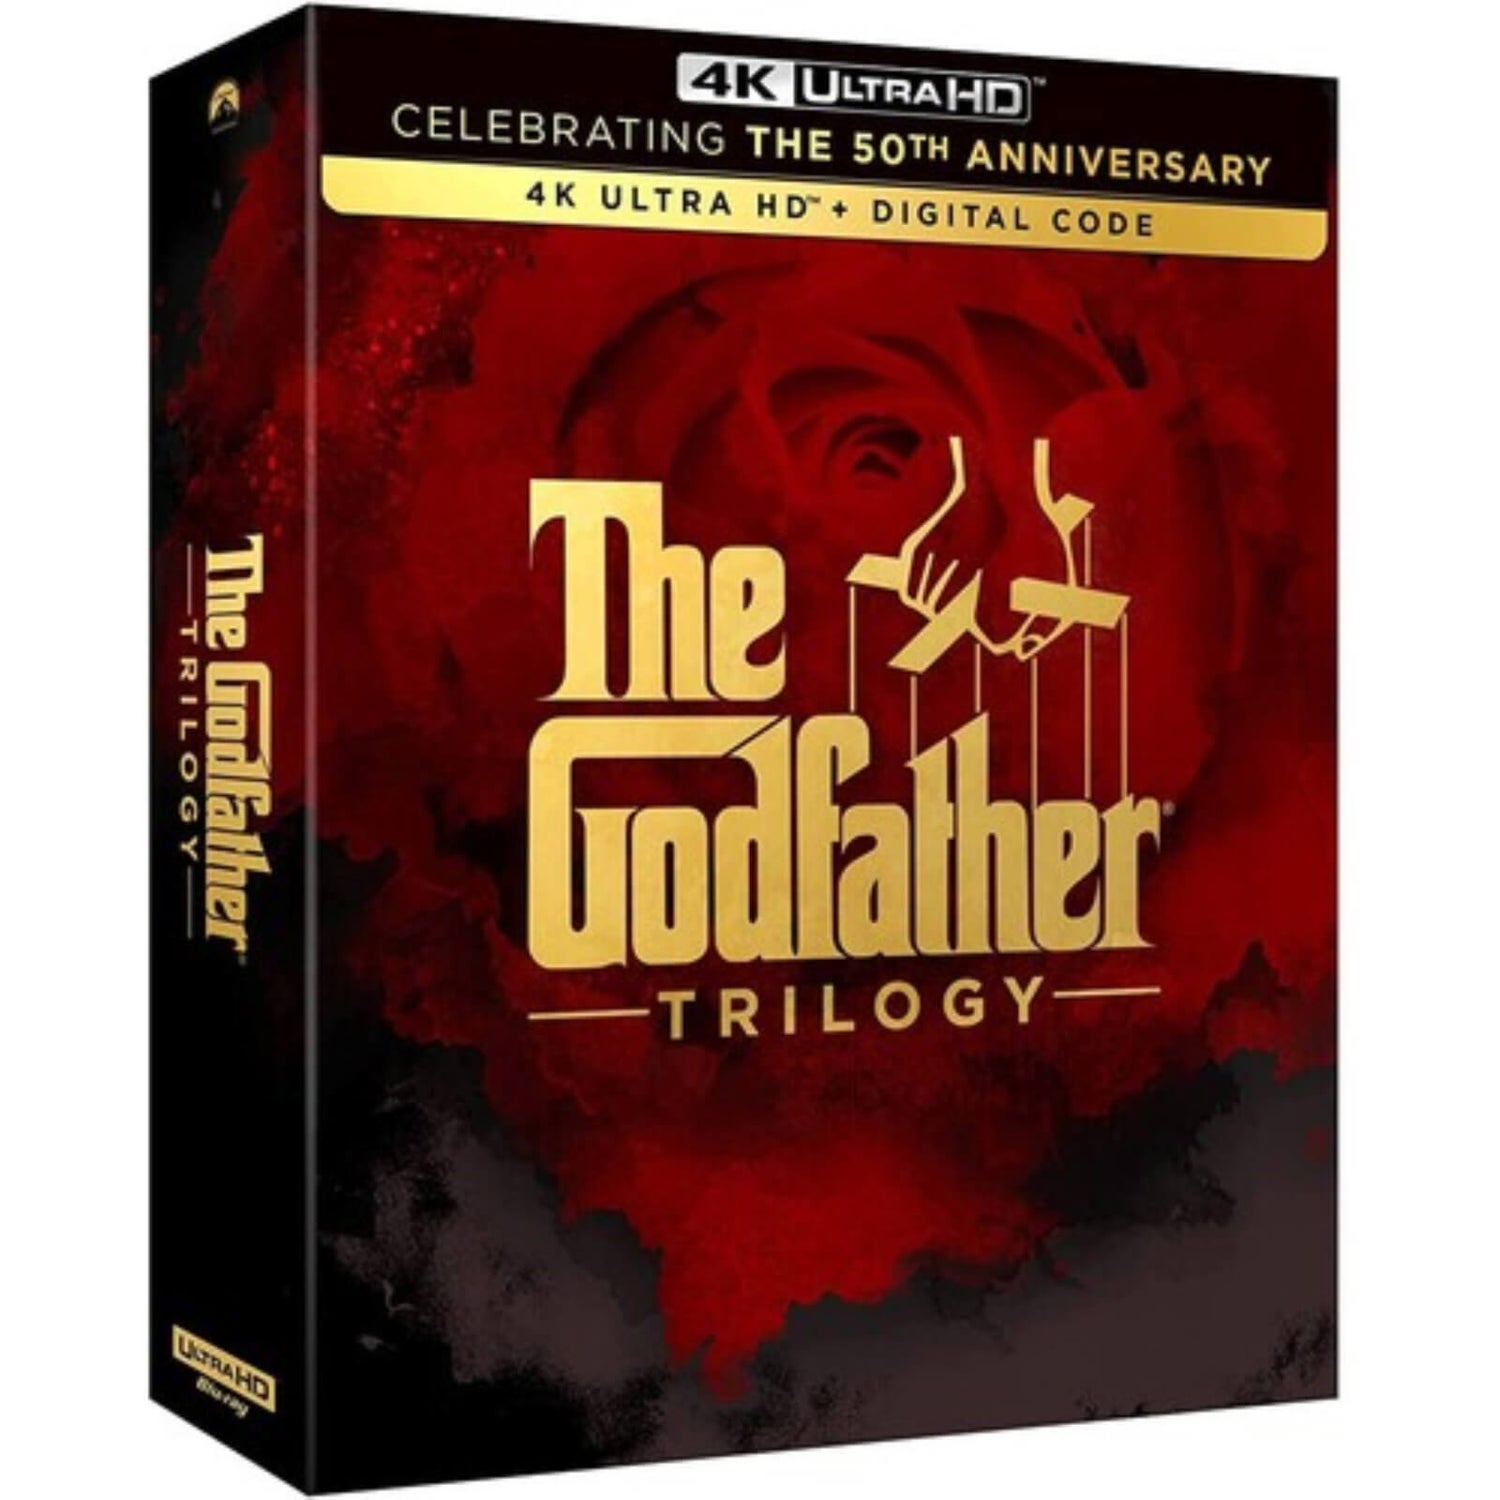 The Godfather Trilogy: 50th Anniversary - 4K Ultra HD (US Import)